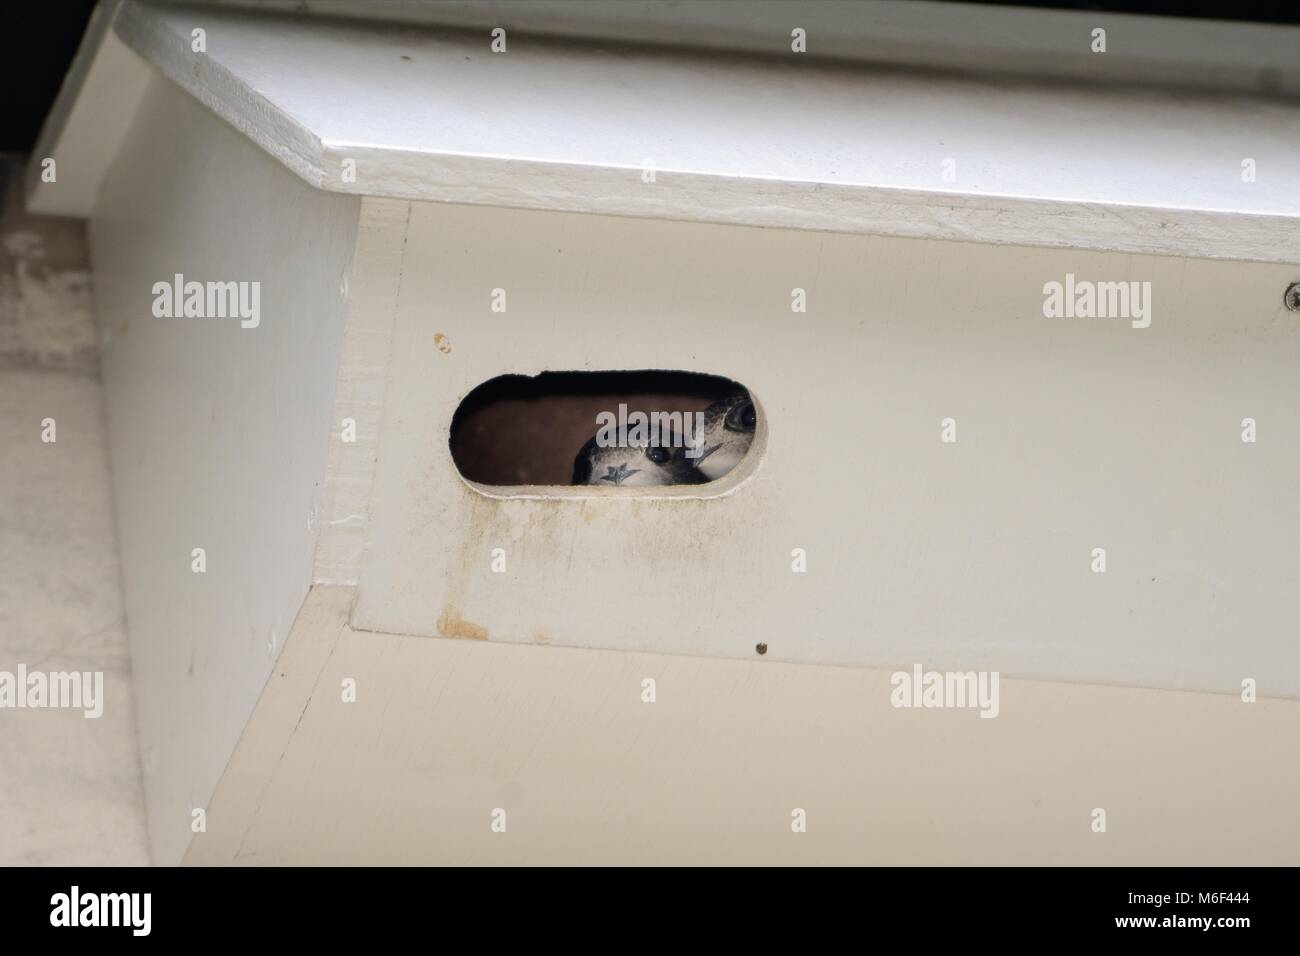 Two Common swift chicks (Apus apus) peering from a nestbox attached under the eaves of a house, Milton, Cambridge, UK, July. Stock Photo